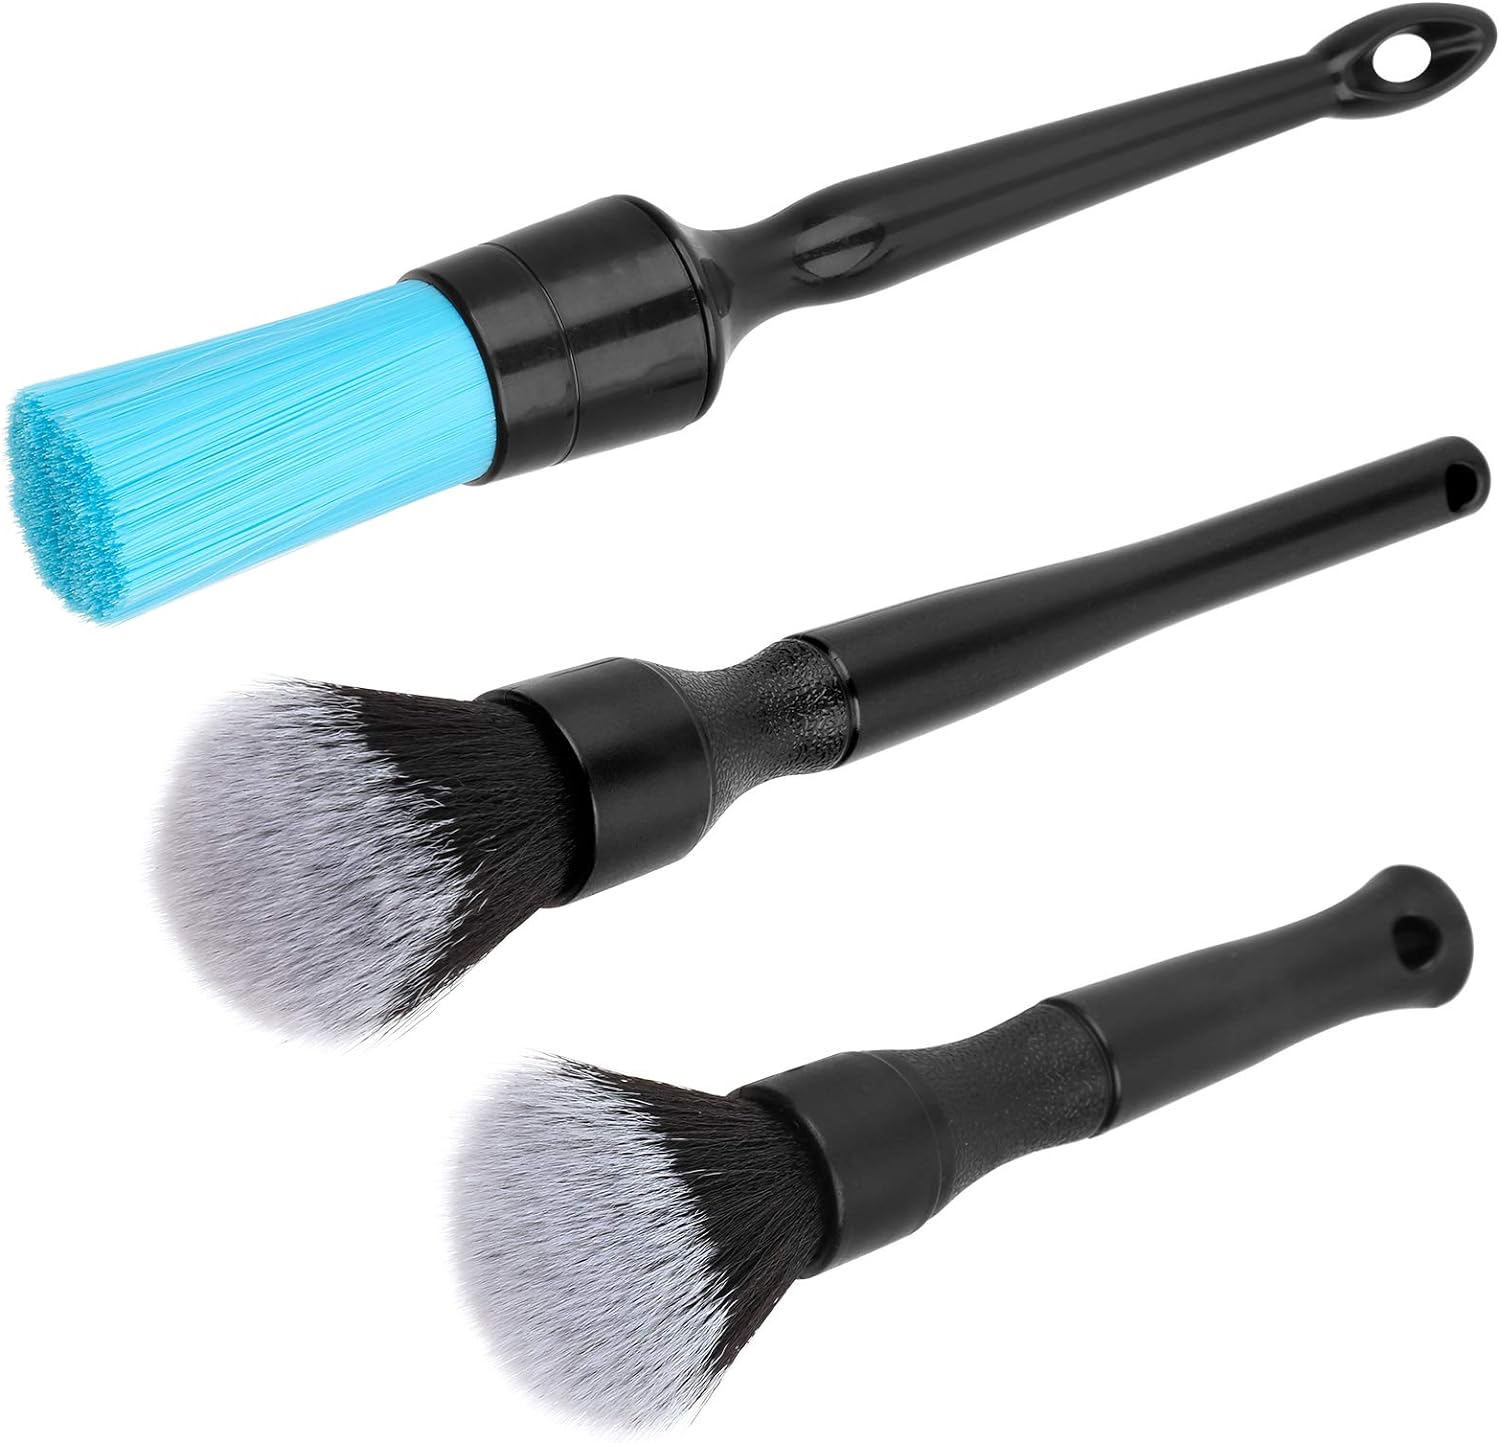 AntBooBoo Ultra- Soft Car Detailing Brush Set, Auto Detail Brush Kit for Elegant Surfaces, Interior Exterior No Scratch for Cleaning Air